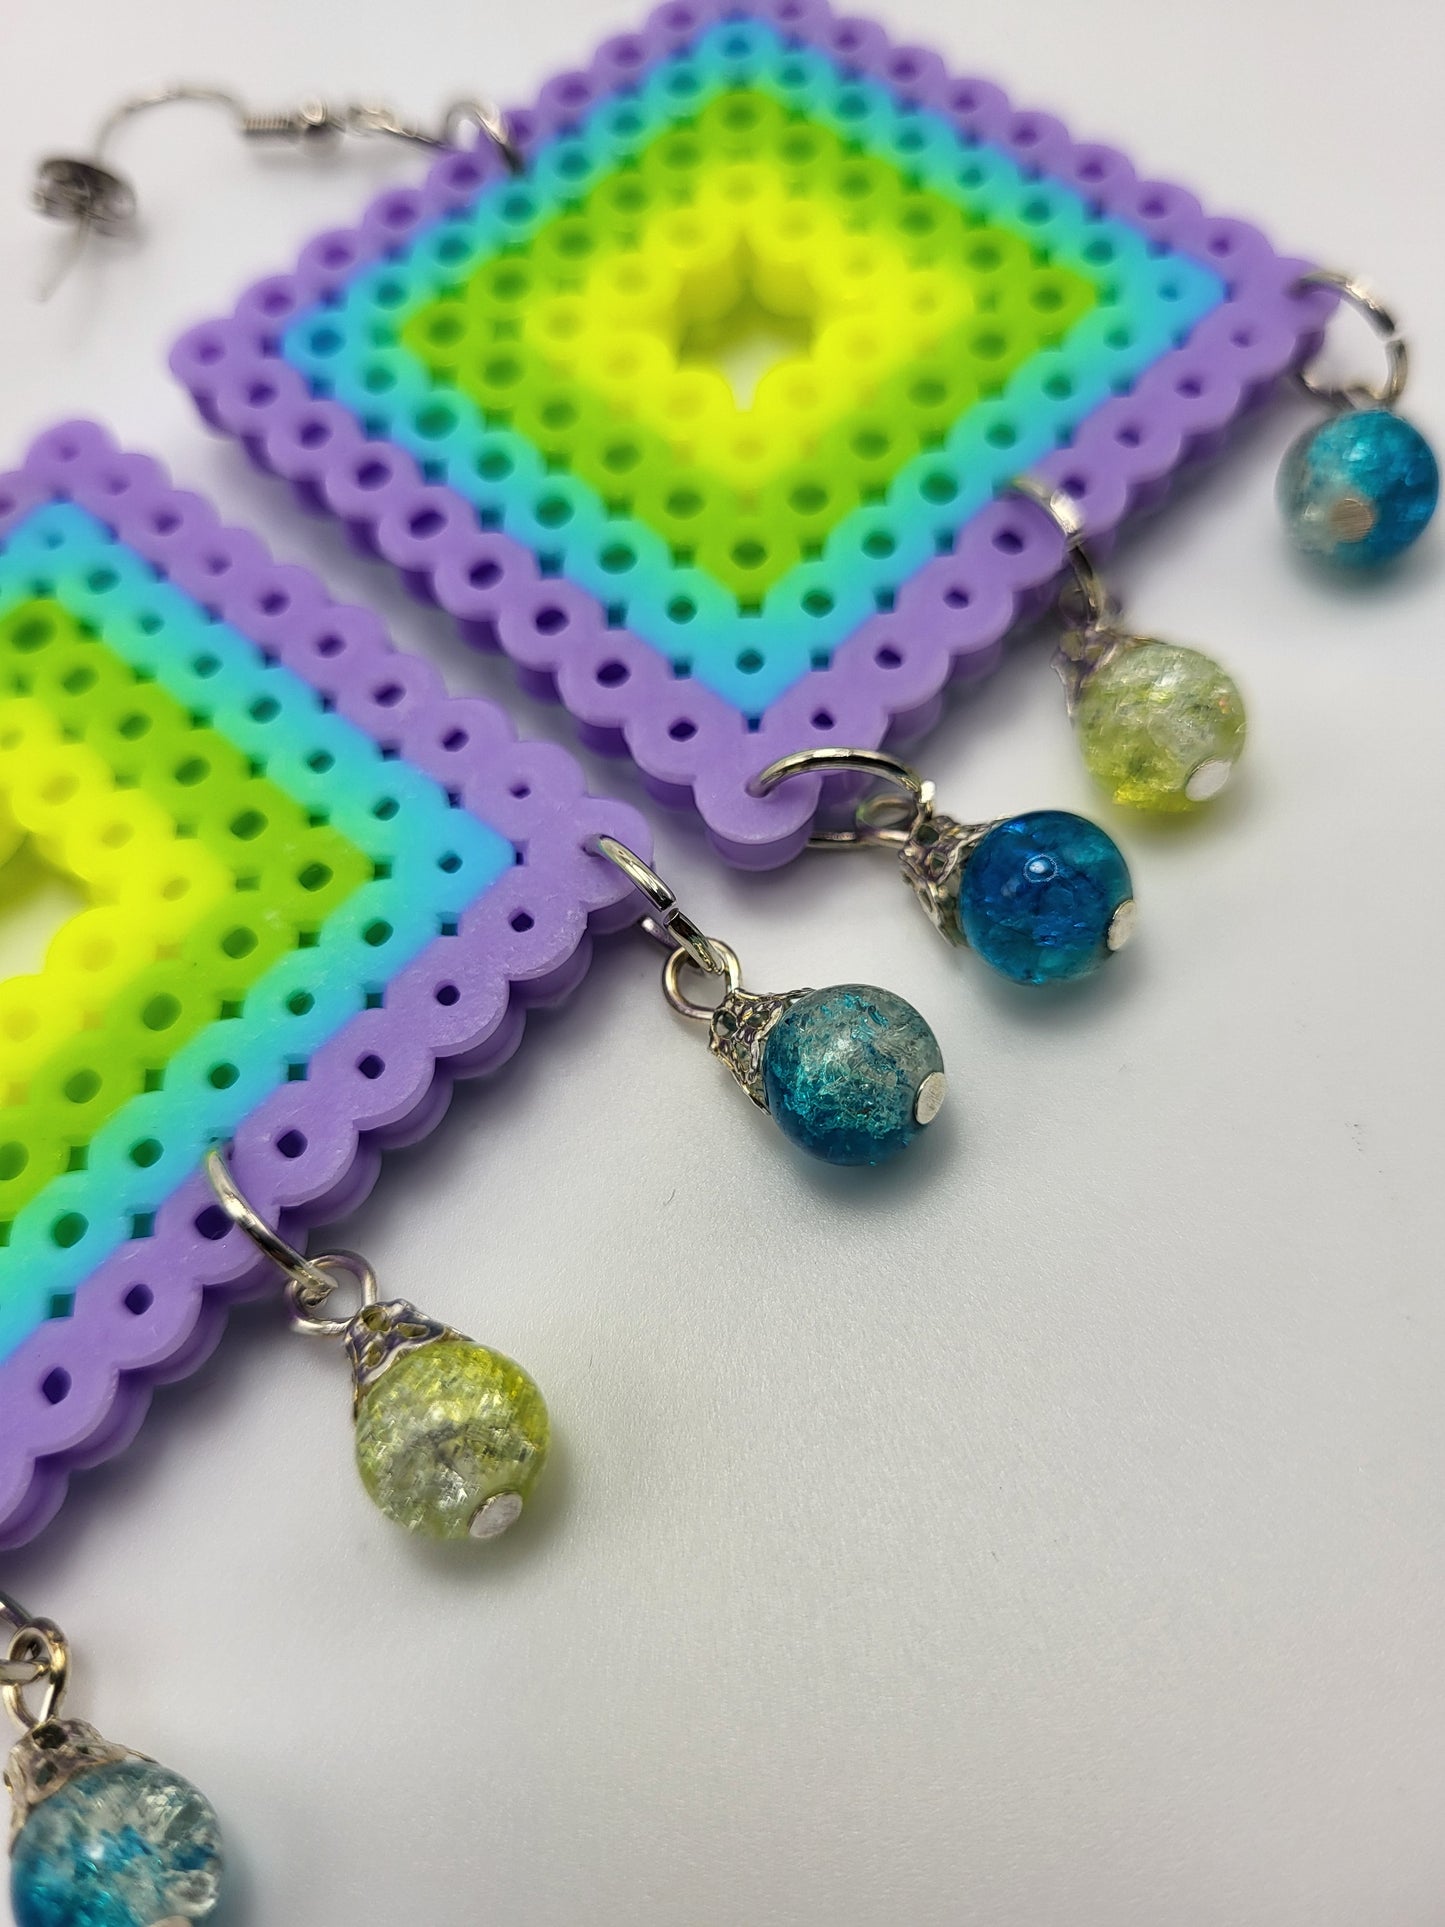 Lilac Perler Bead Square Earrings with Dangling Glass Beads – Whimsical Elegance for Every Occasion!